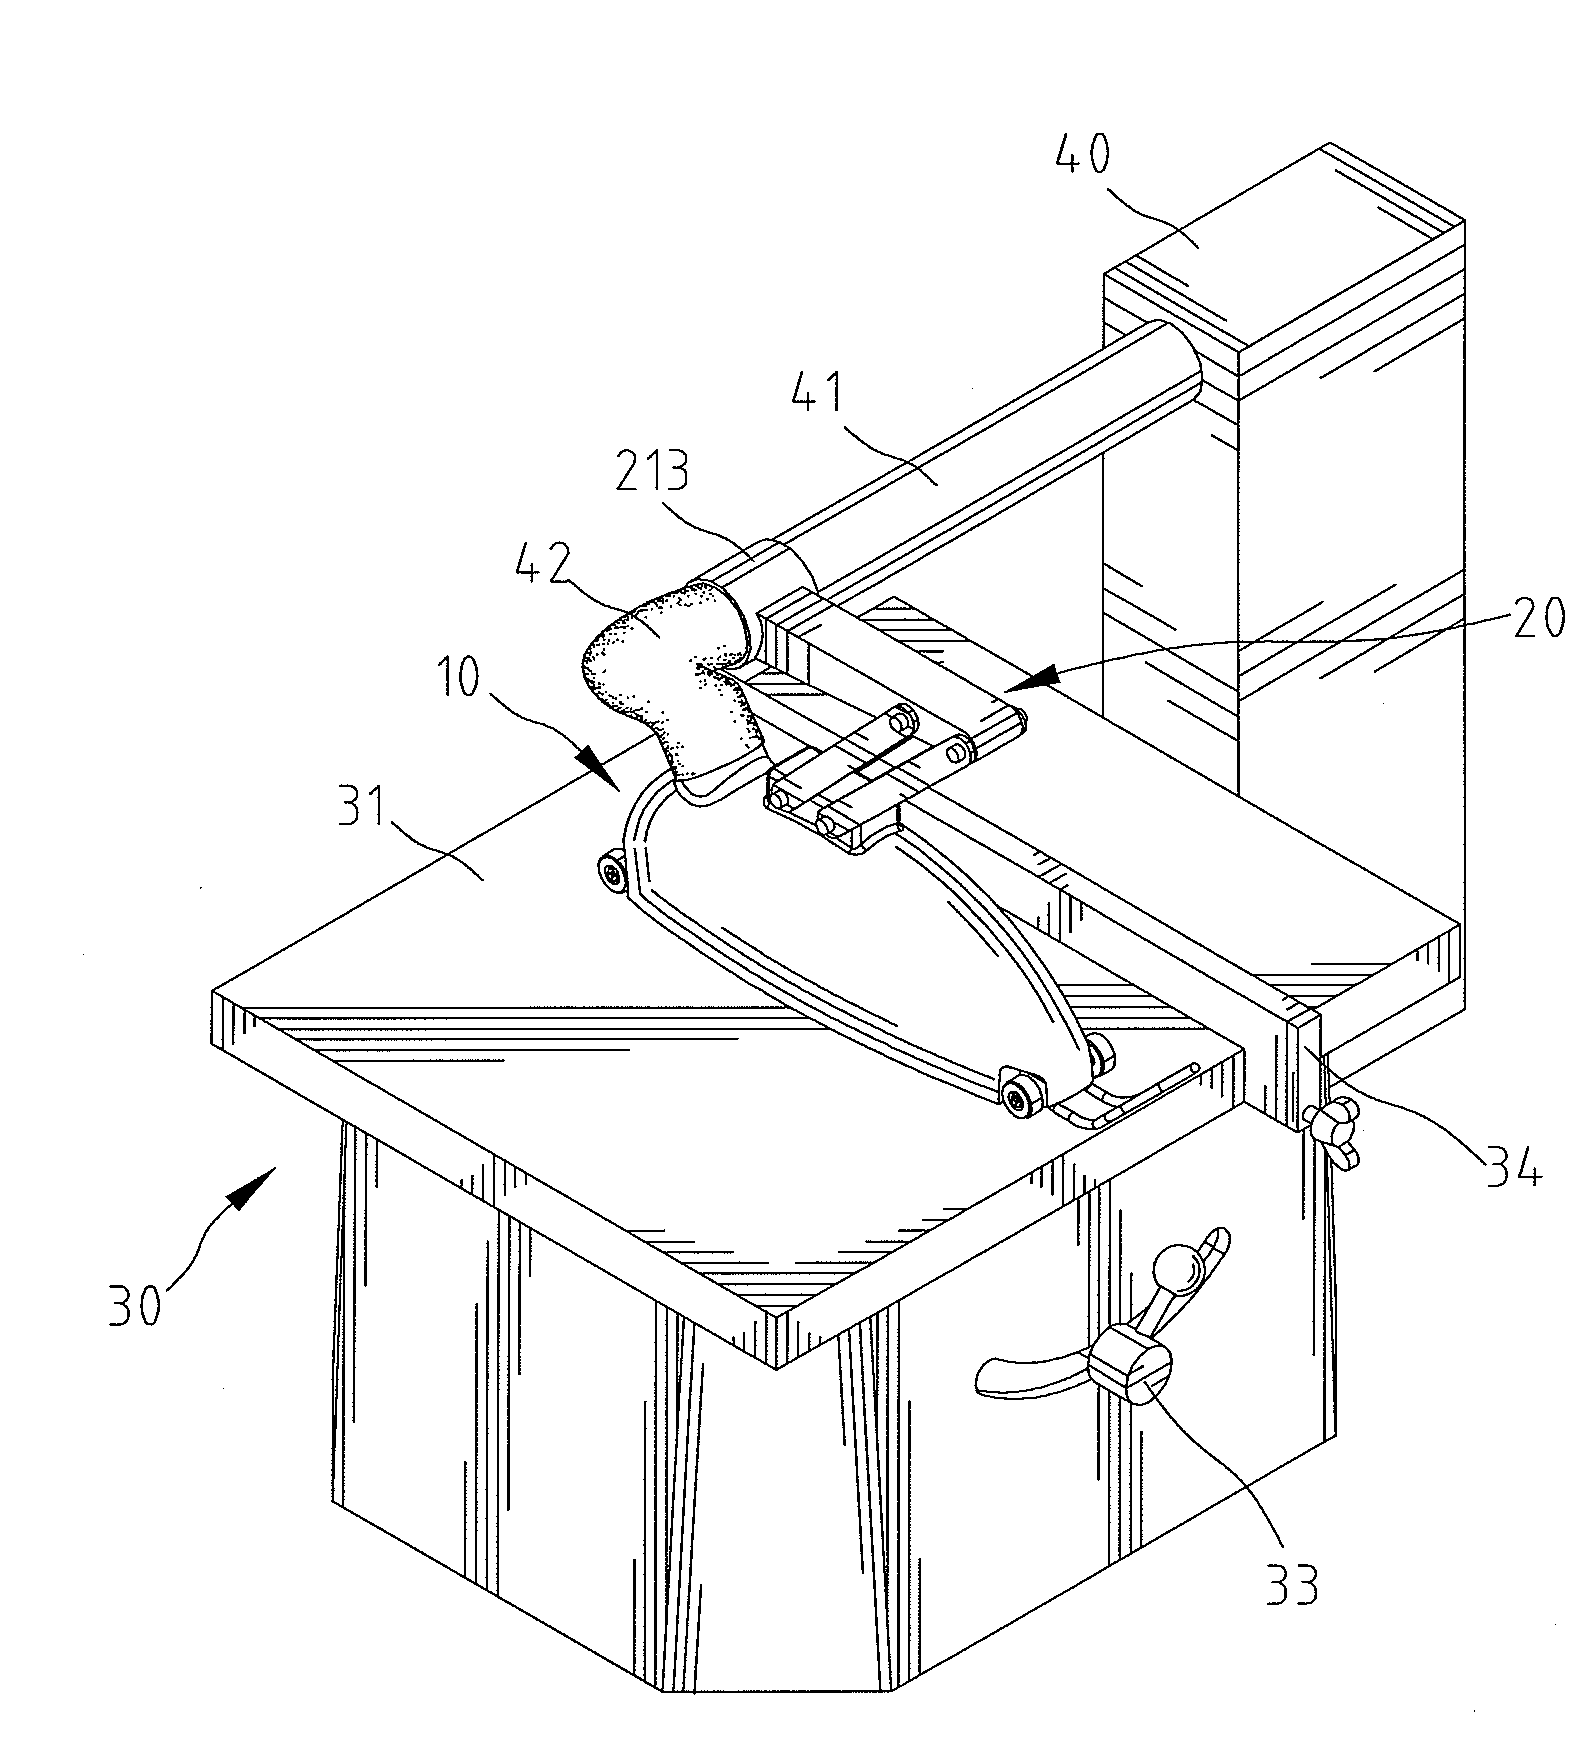 Dust Control Hood Assembly for a Cutting Machine